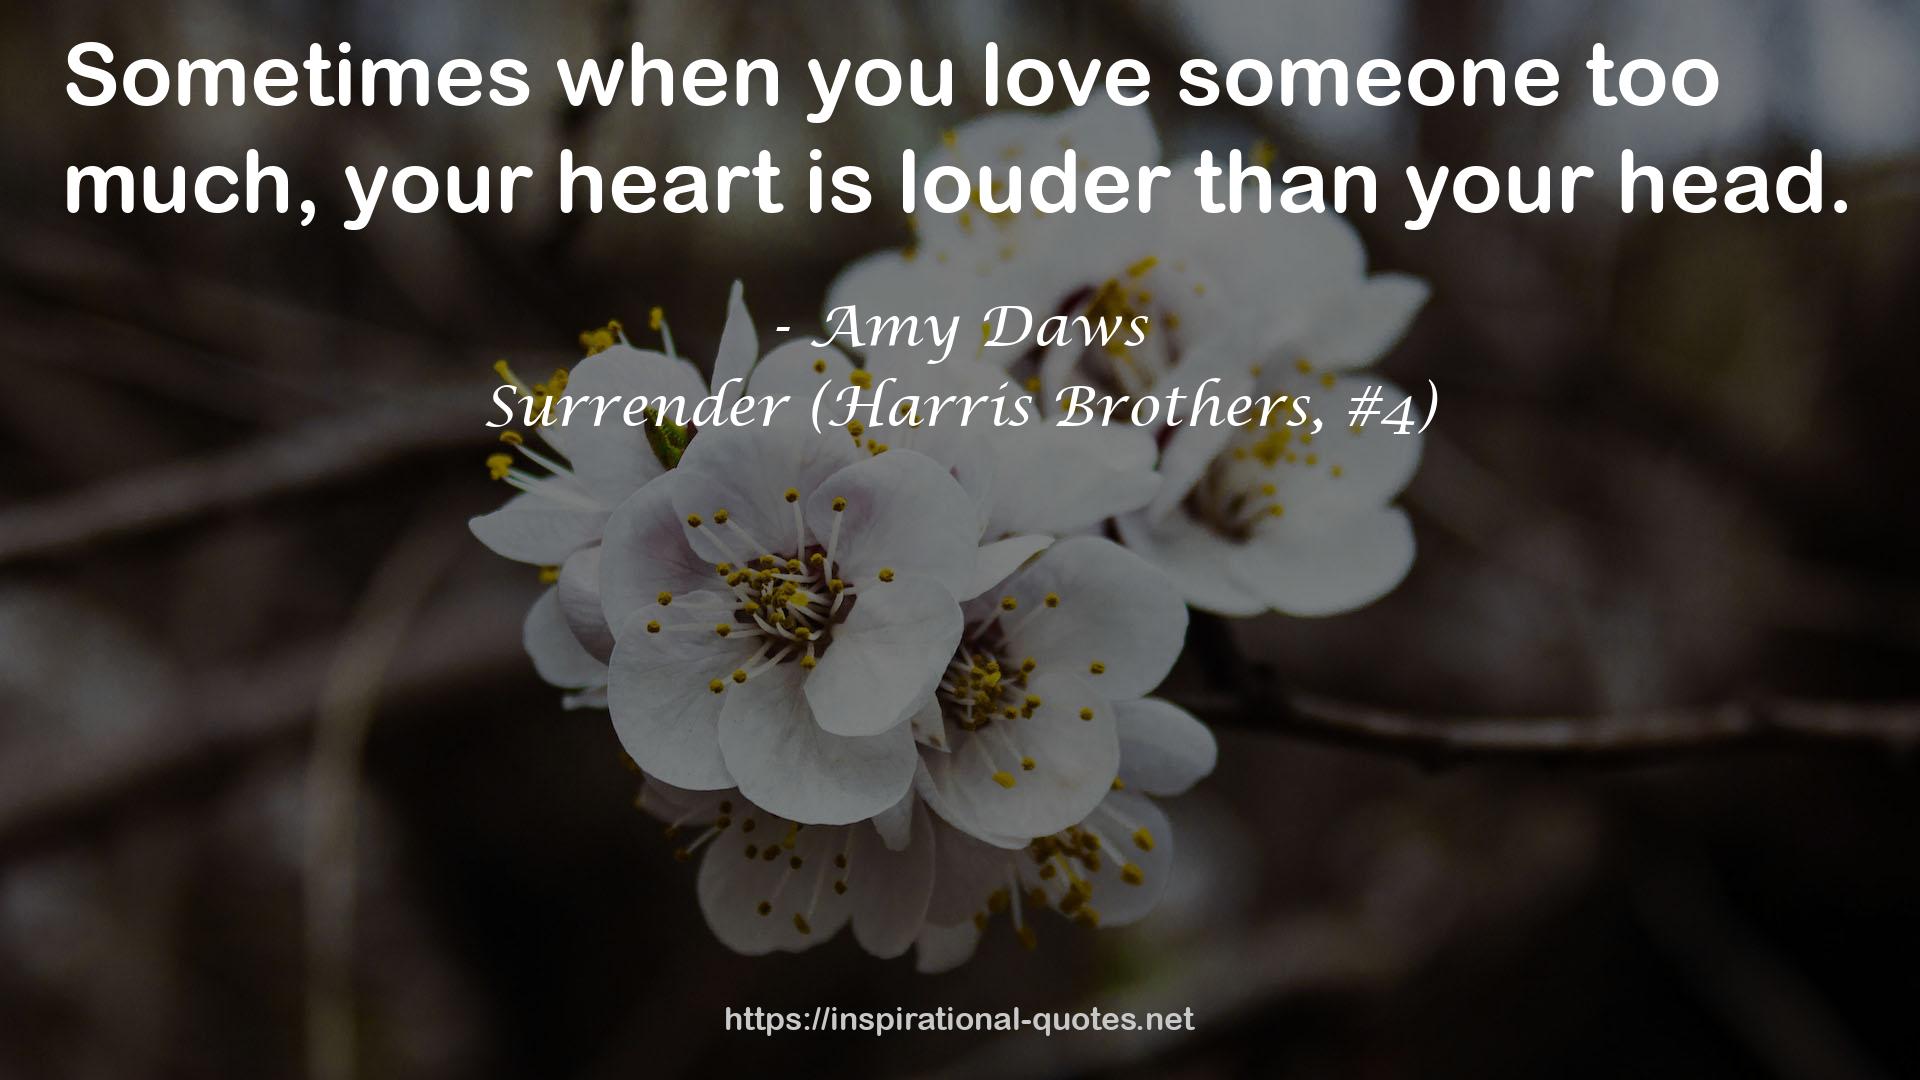 Surrender (Harris Brothers, #4) QUOTES